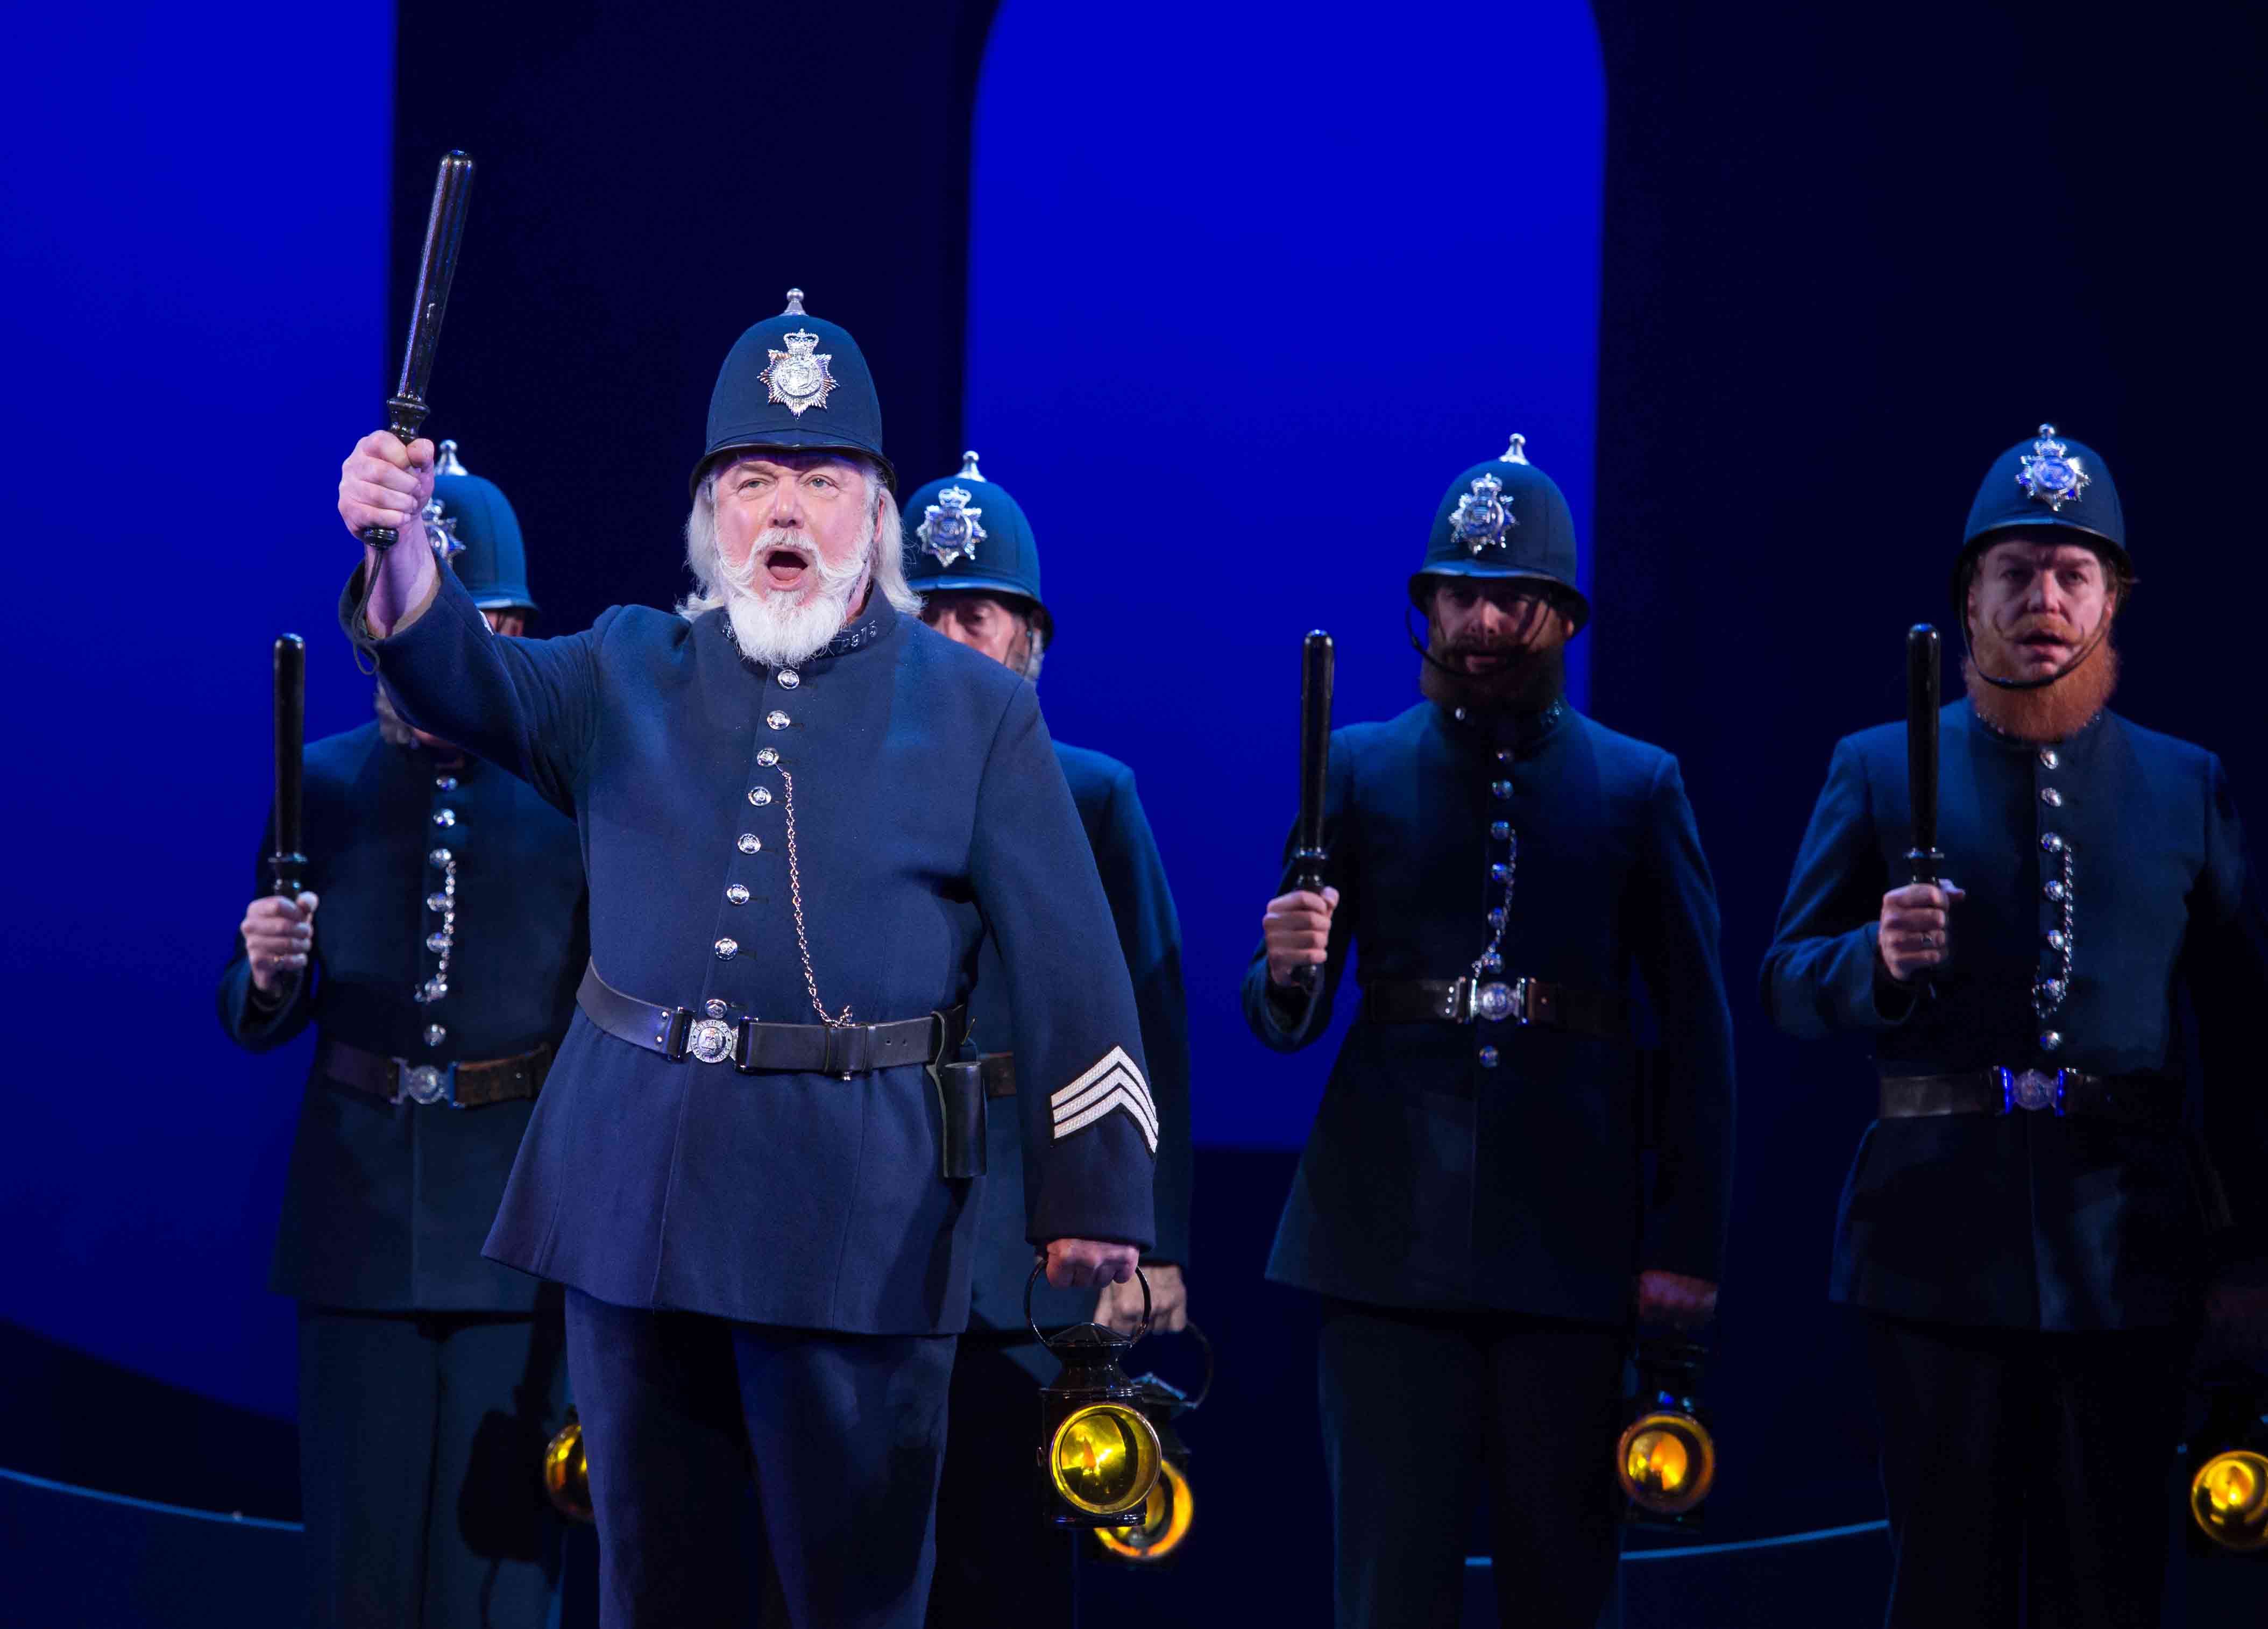 ENO's The Pirates of Penzance - John Tomlinson as Sergeant of Police. Photo by Tom Bowles